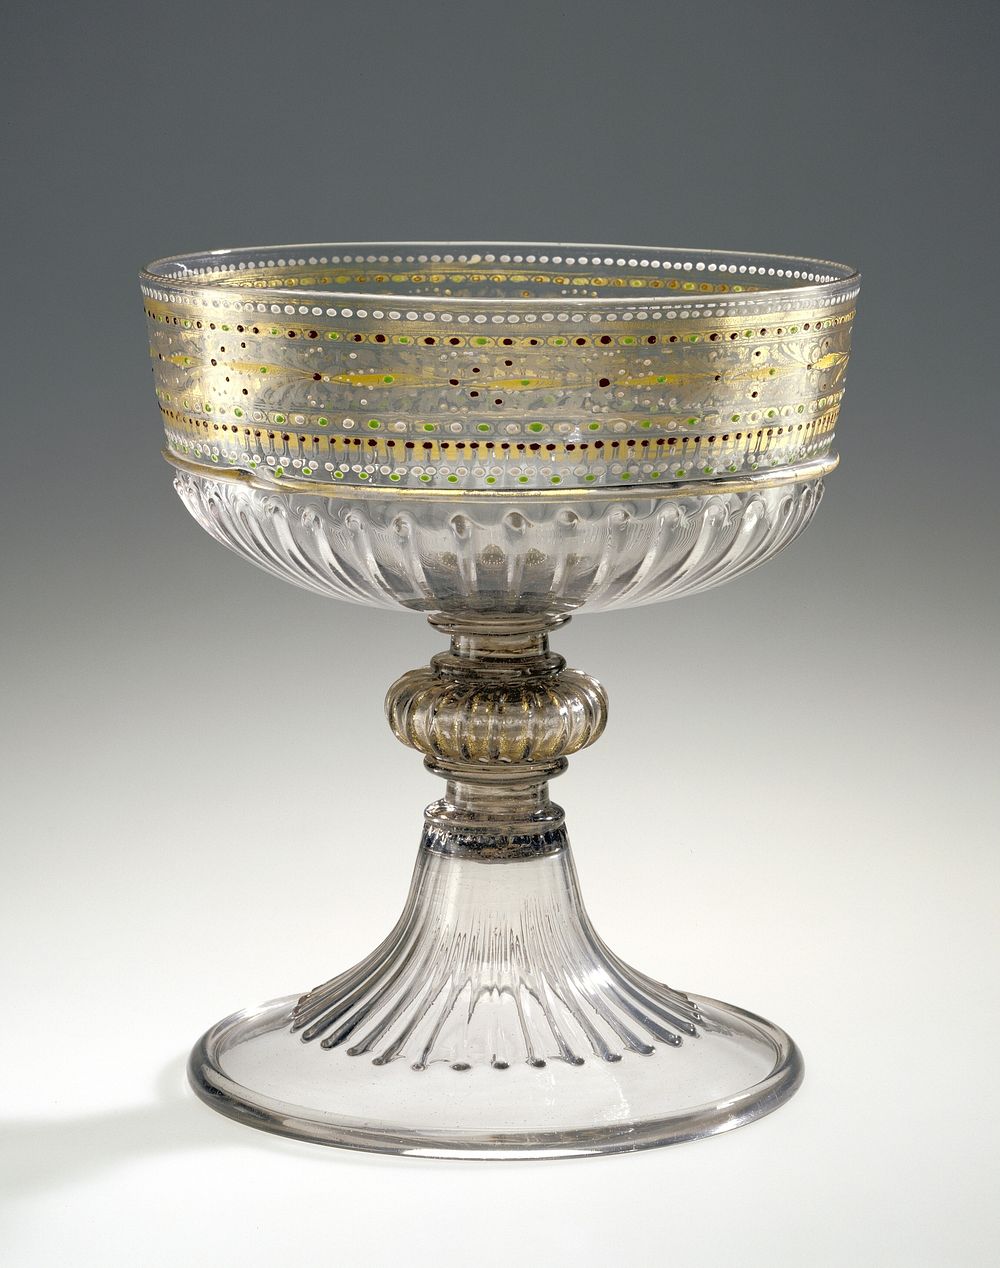 Footed Bowl (Coppa)